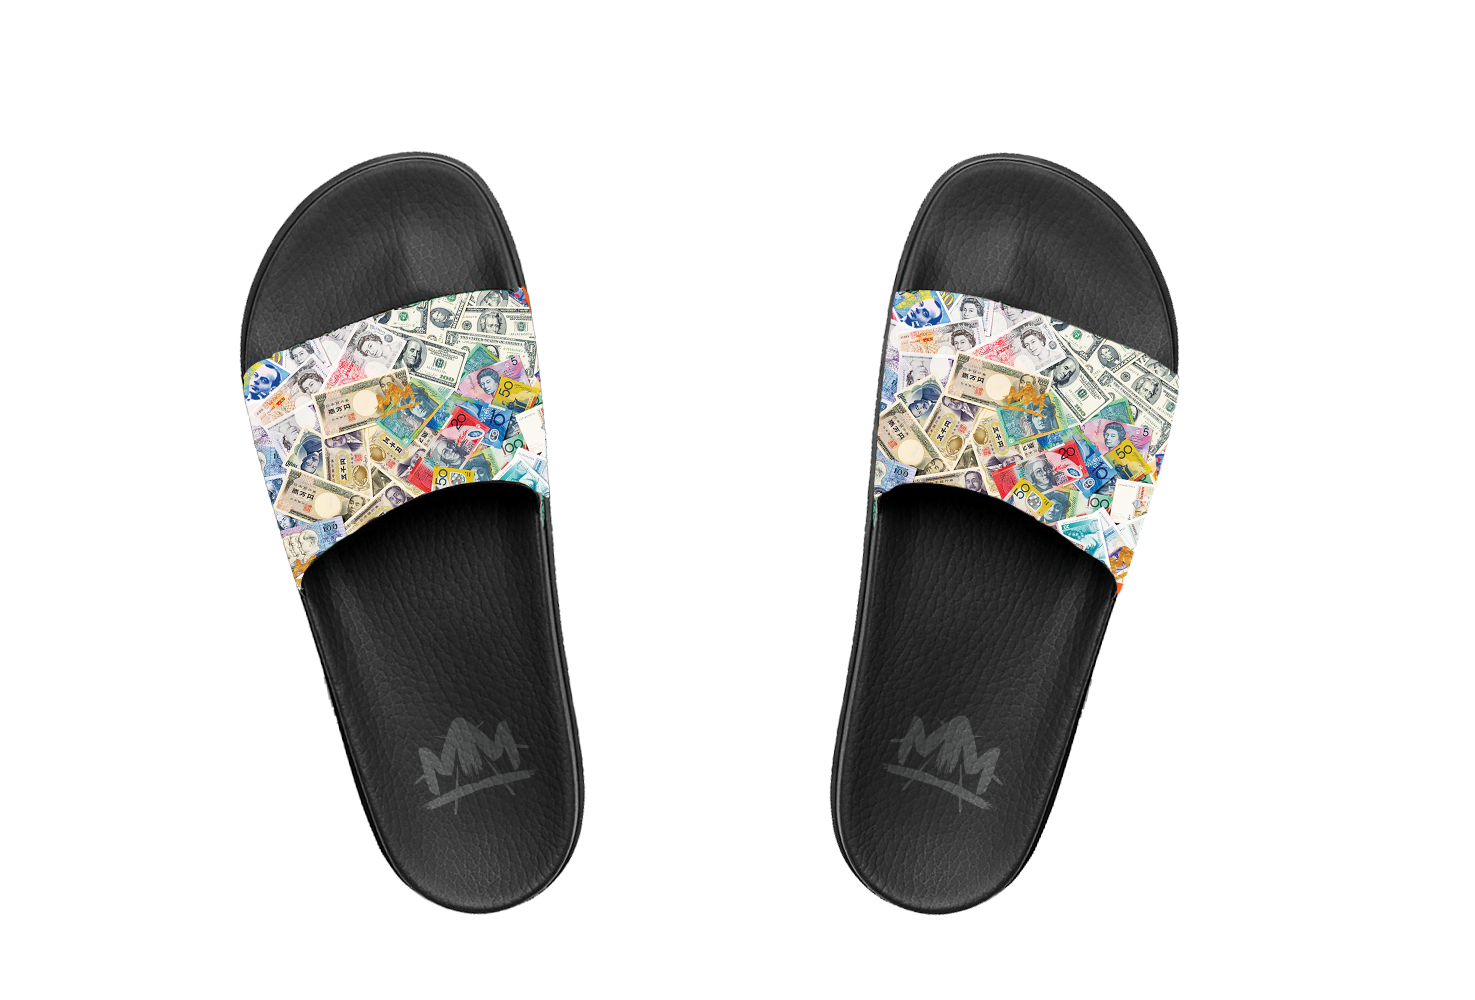 Signed By McFly Slides